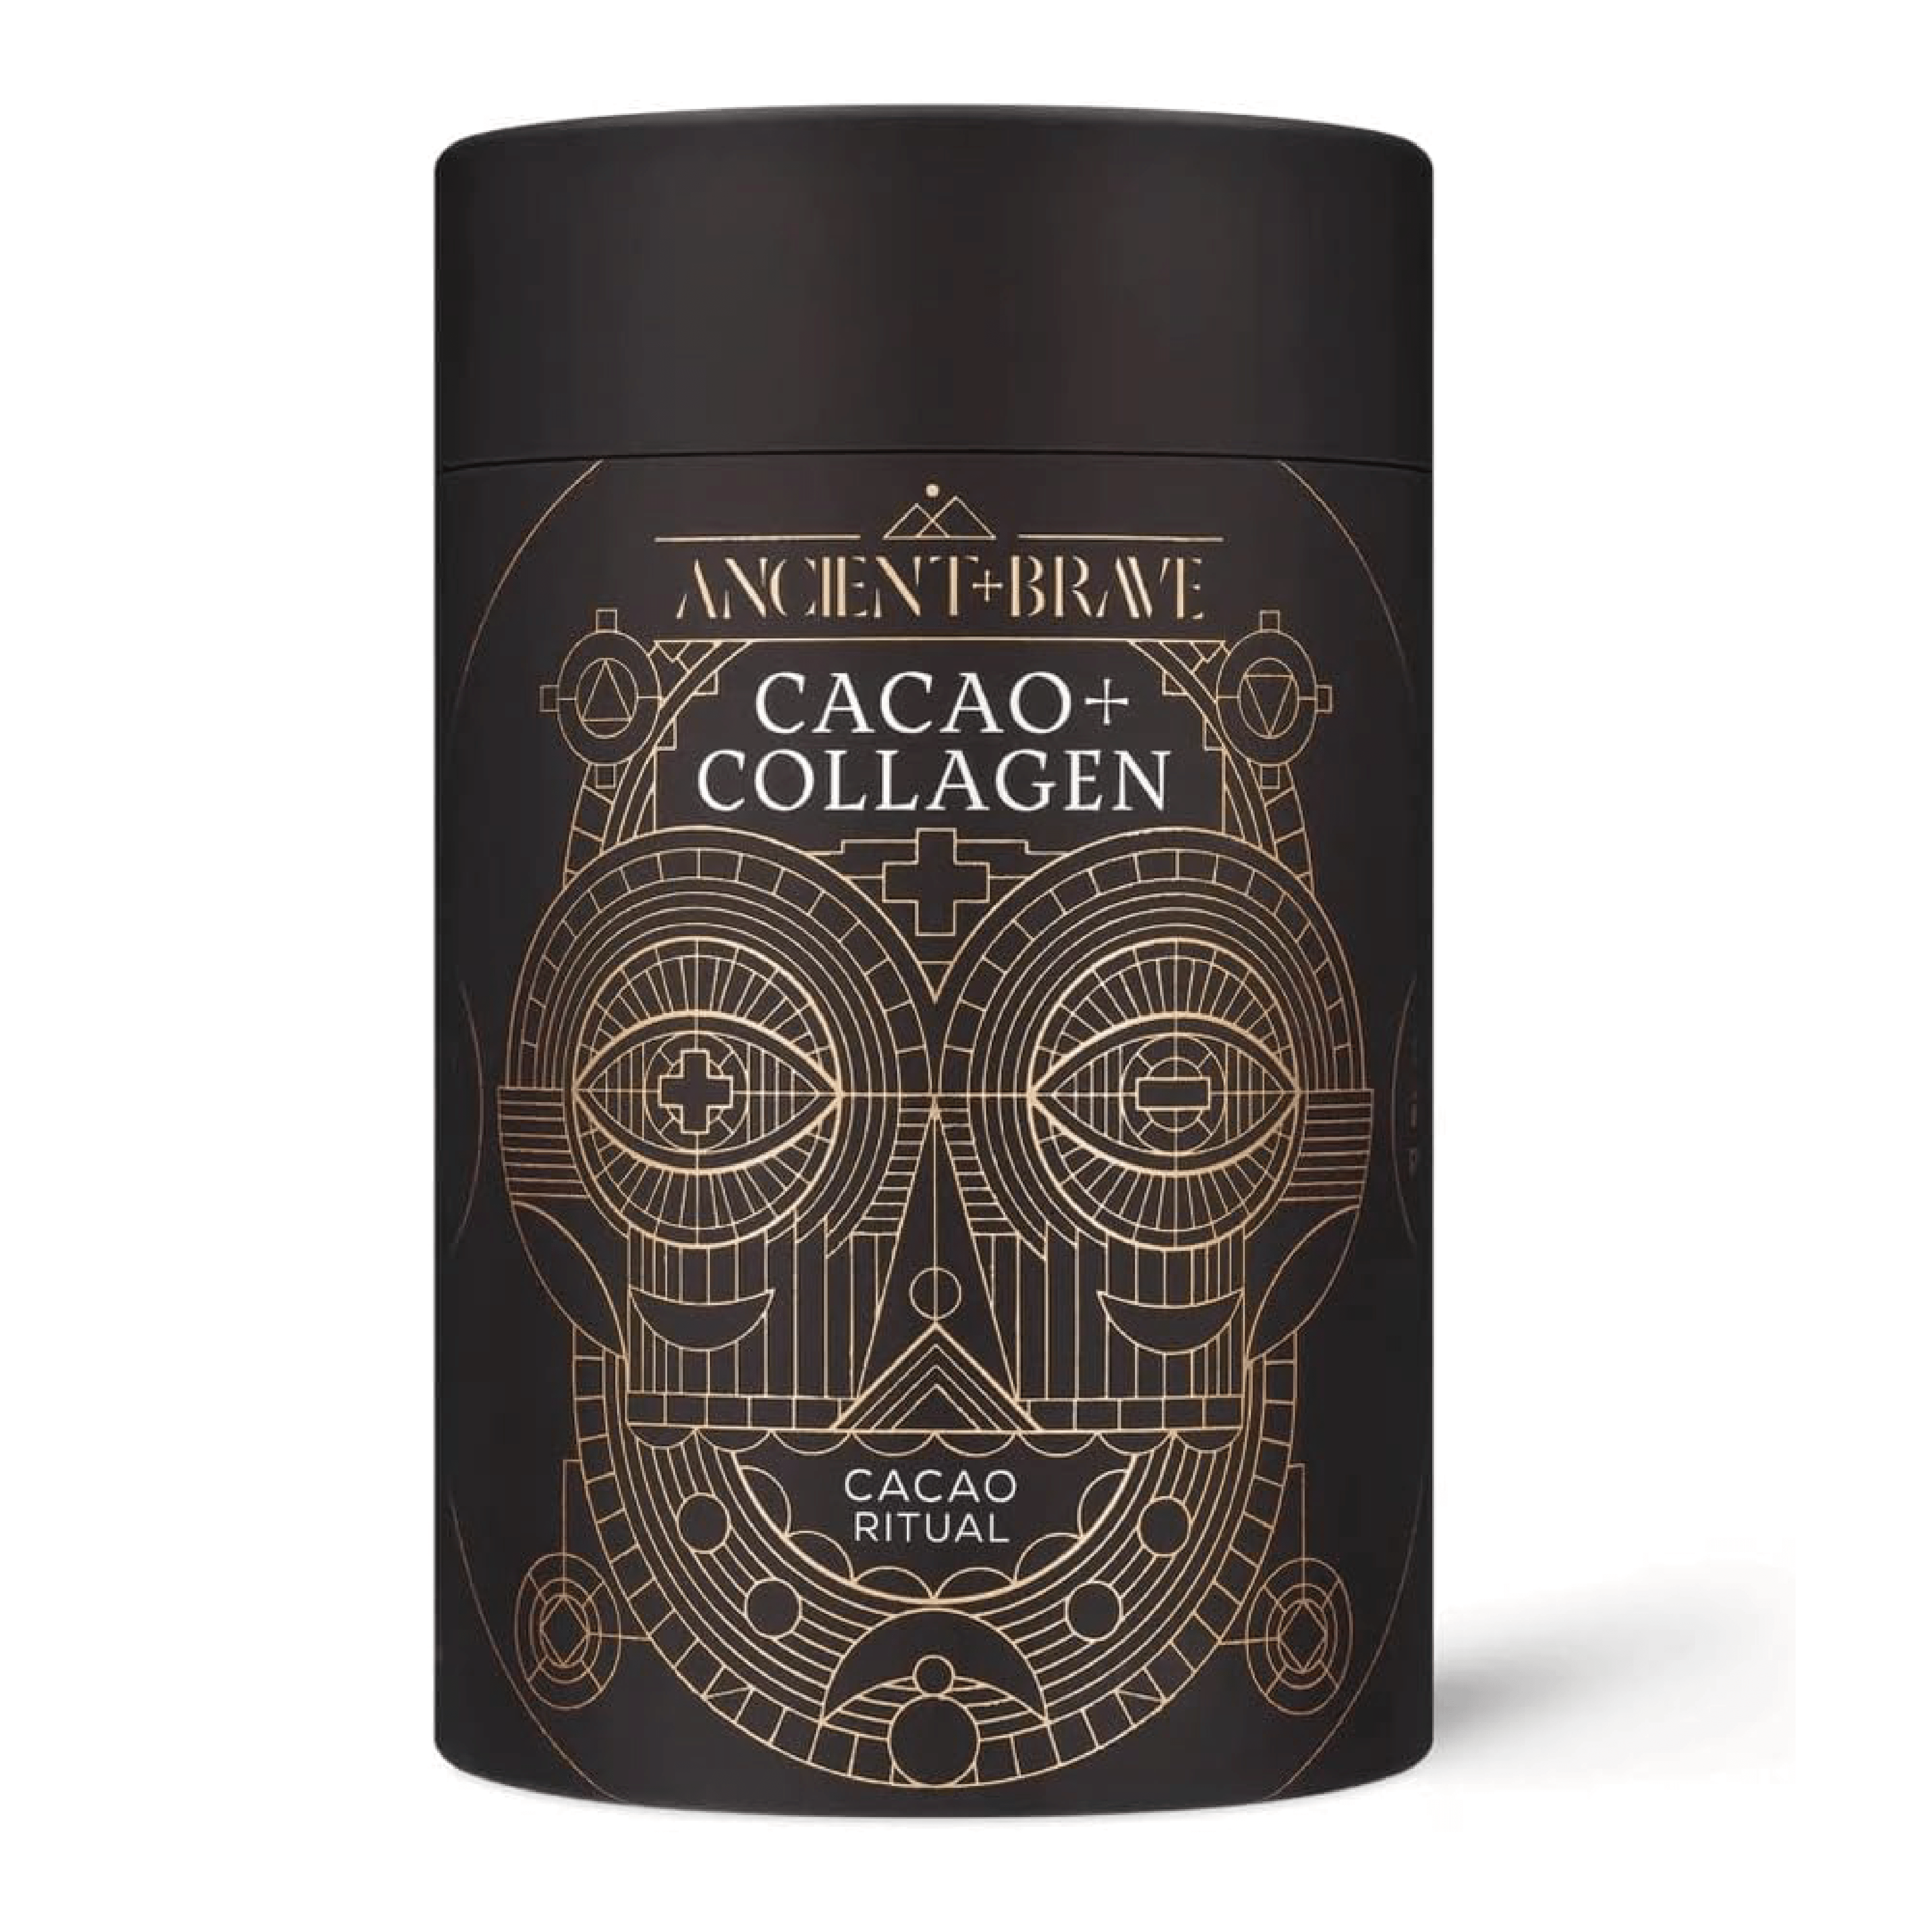 Crafted with premium organic cocoa, ashwagandha, and baobab, this high-protein, keto-friendly concoction transforms your hot chocolate ritual into a nourishing experience.